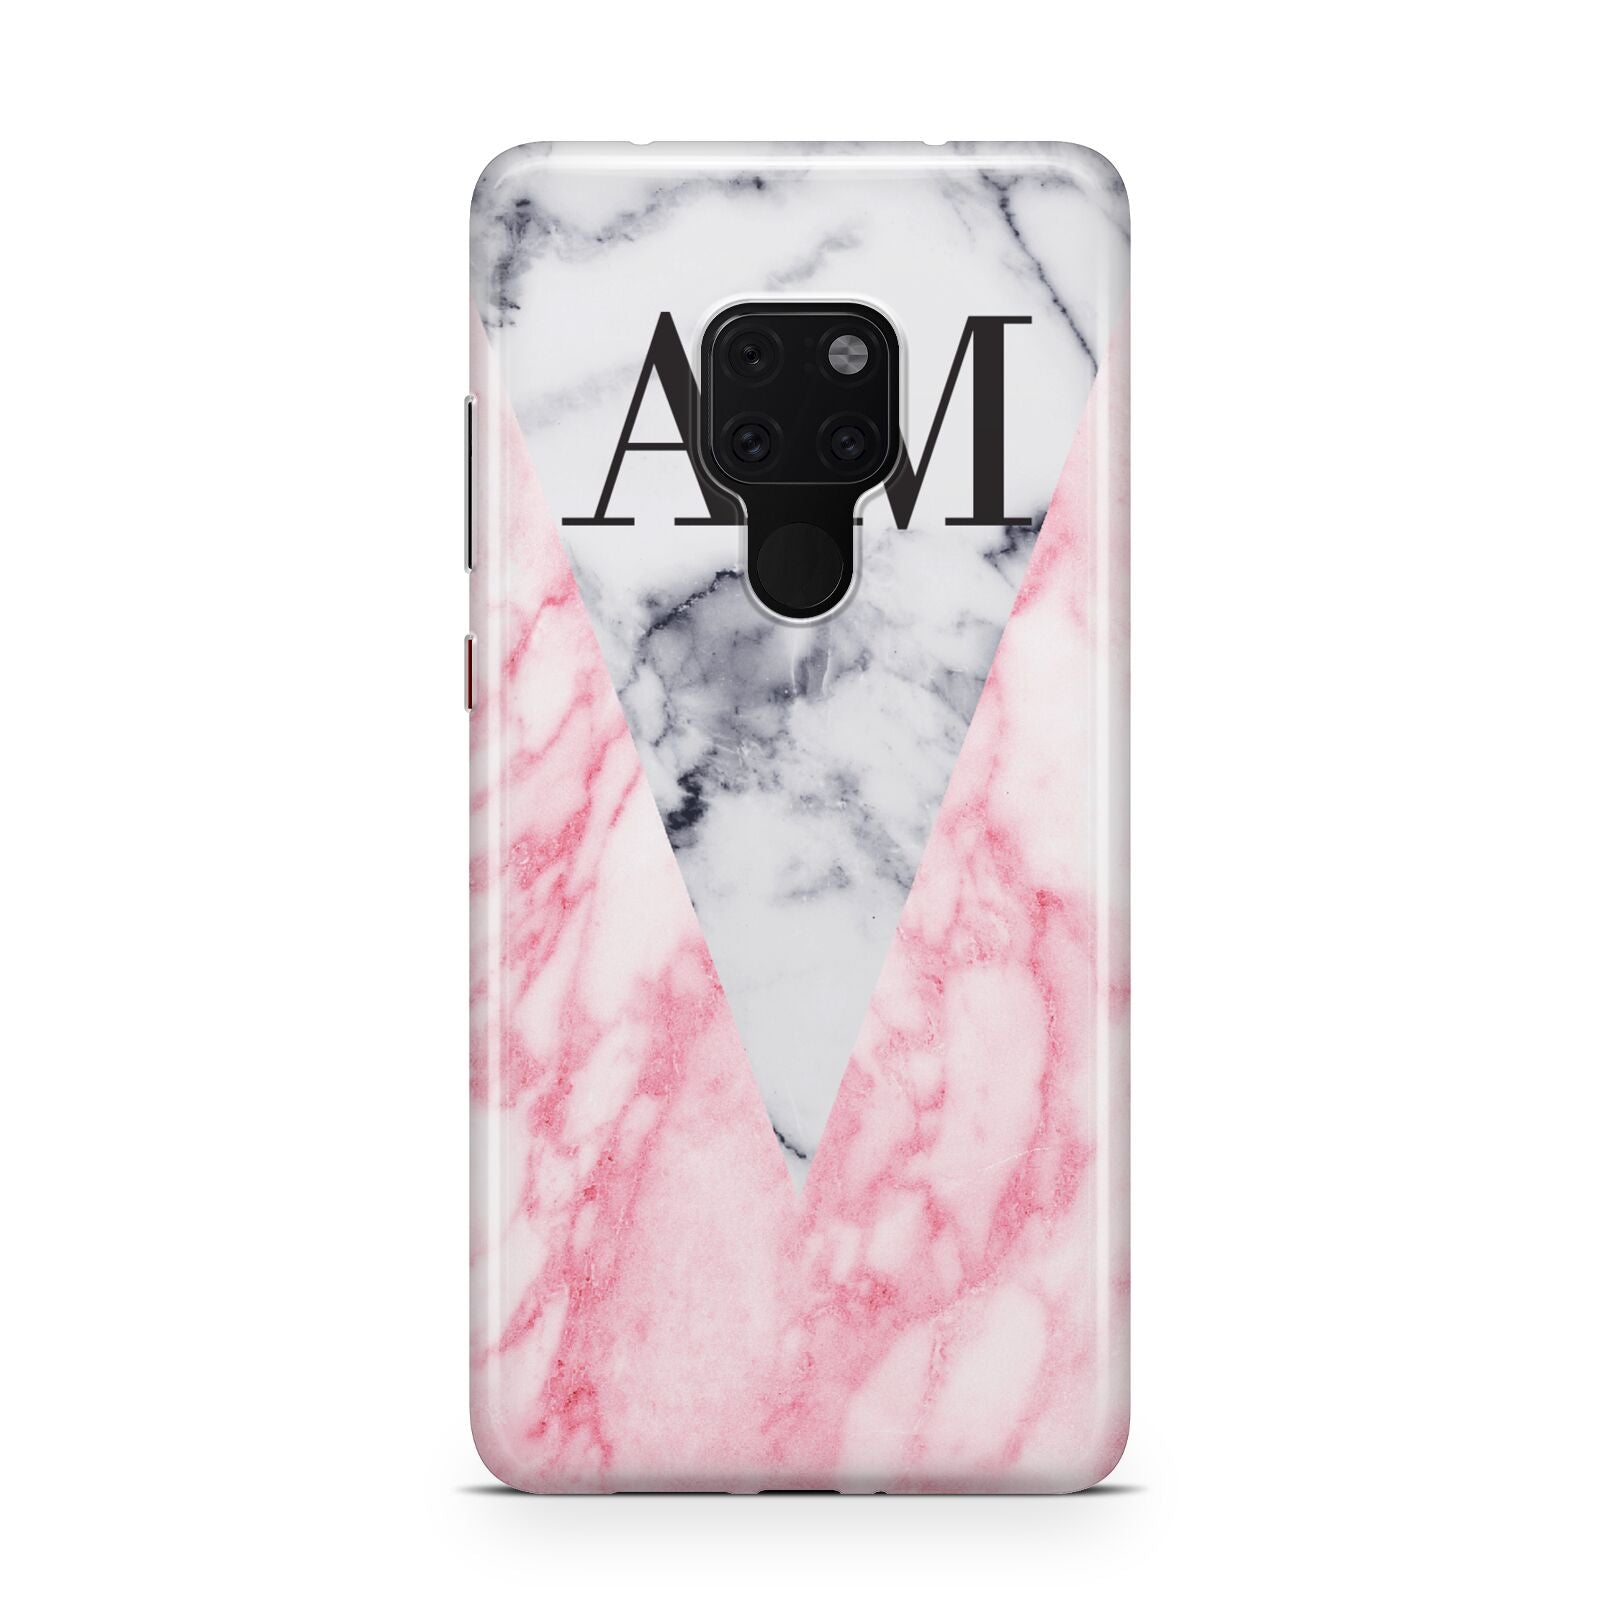 Personalised Grey Inset Marble Initials Huawei Mate 20 Phone Case